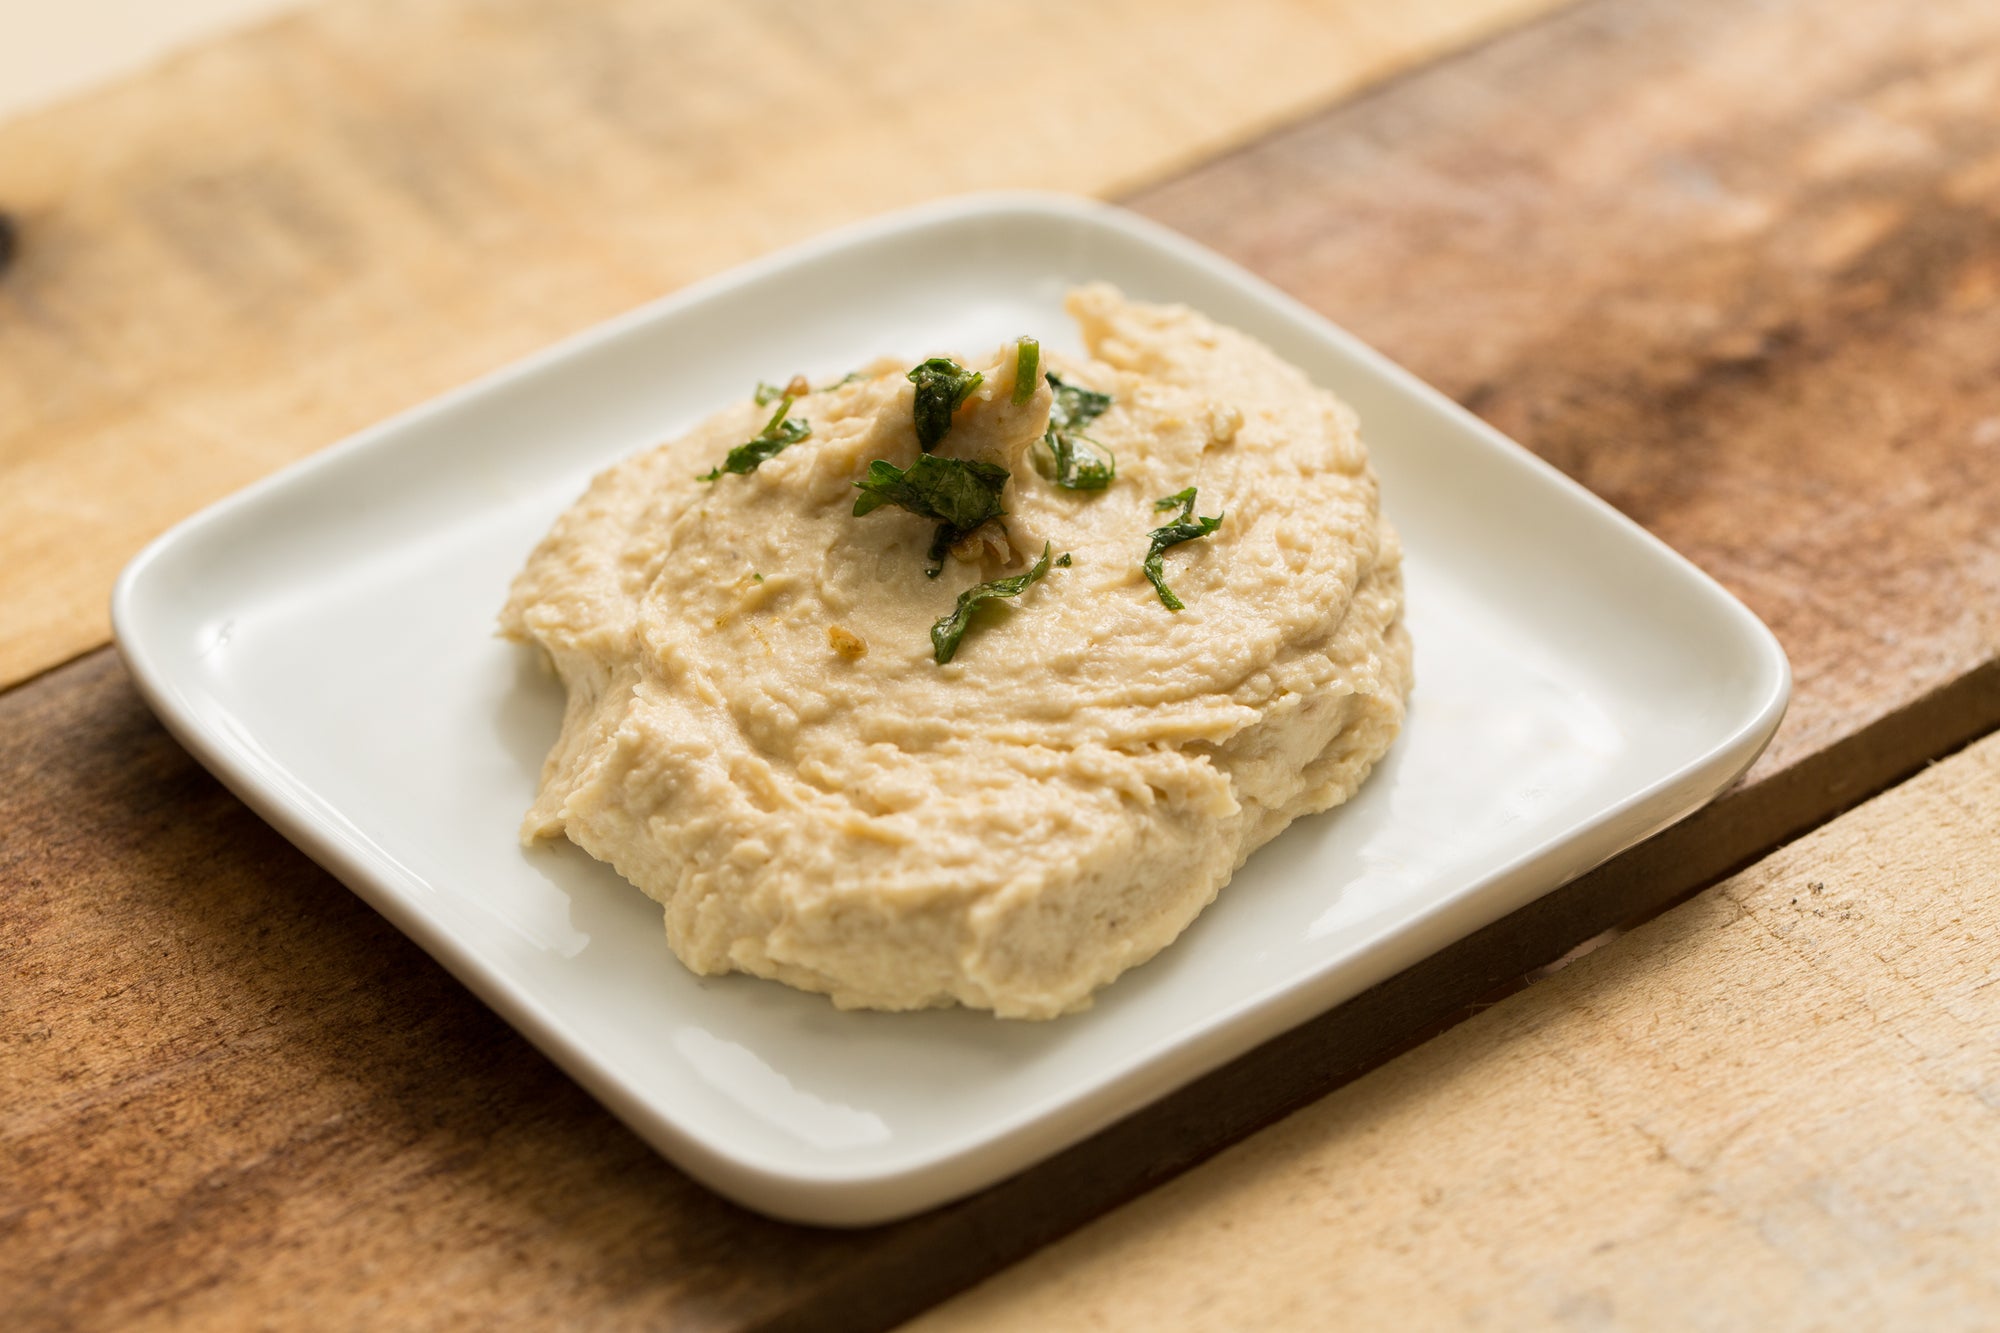 Chickpea hummus on a white plate